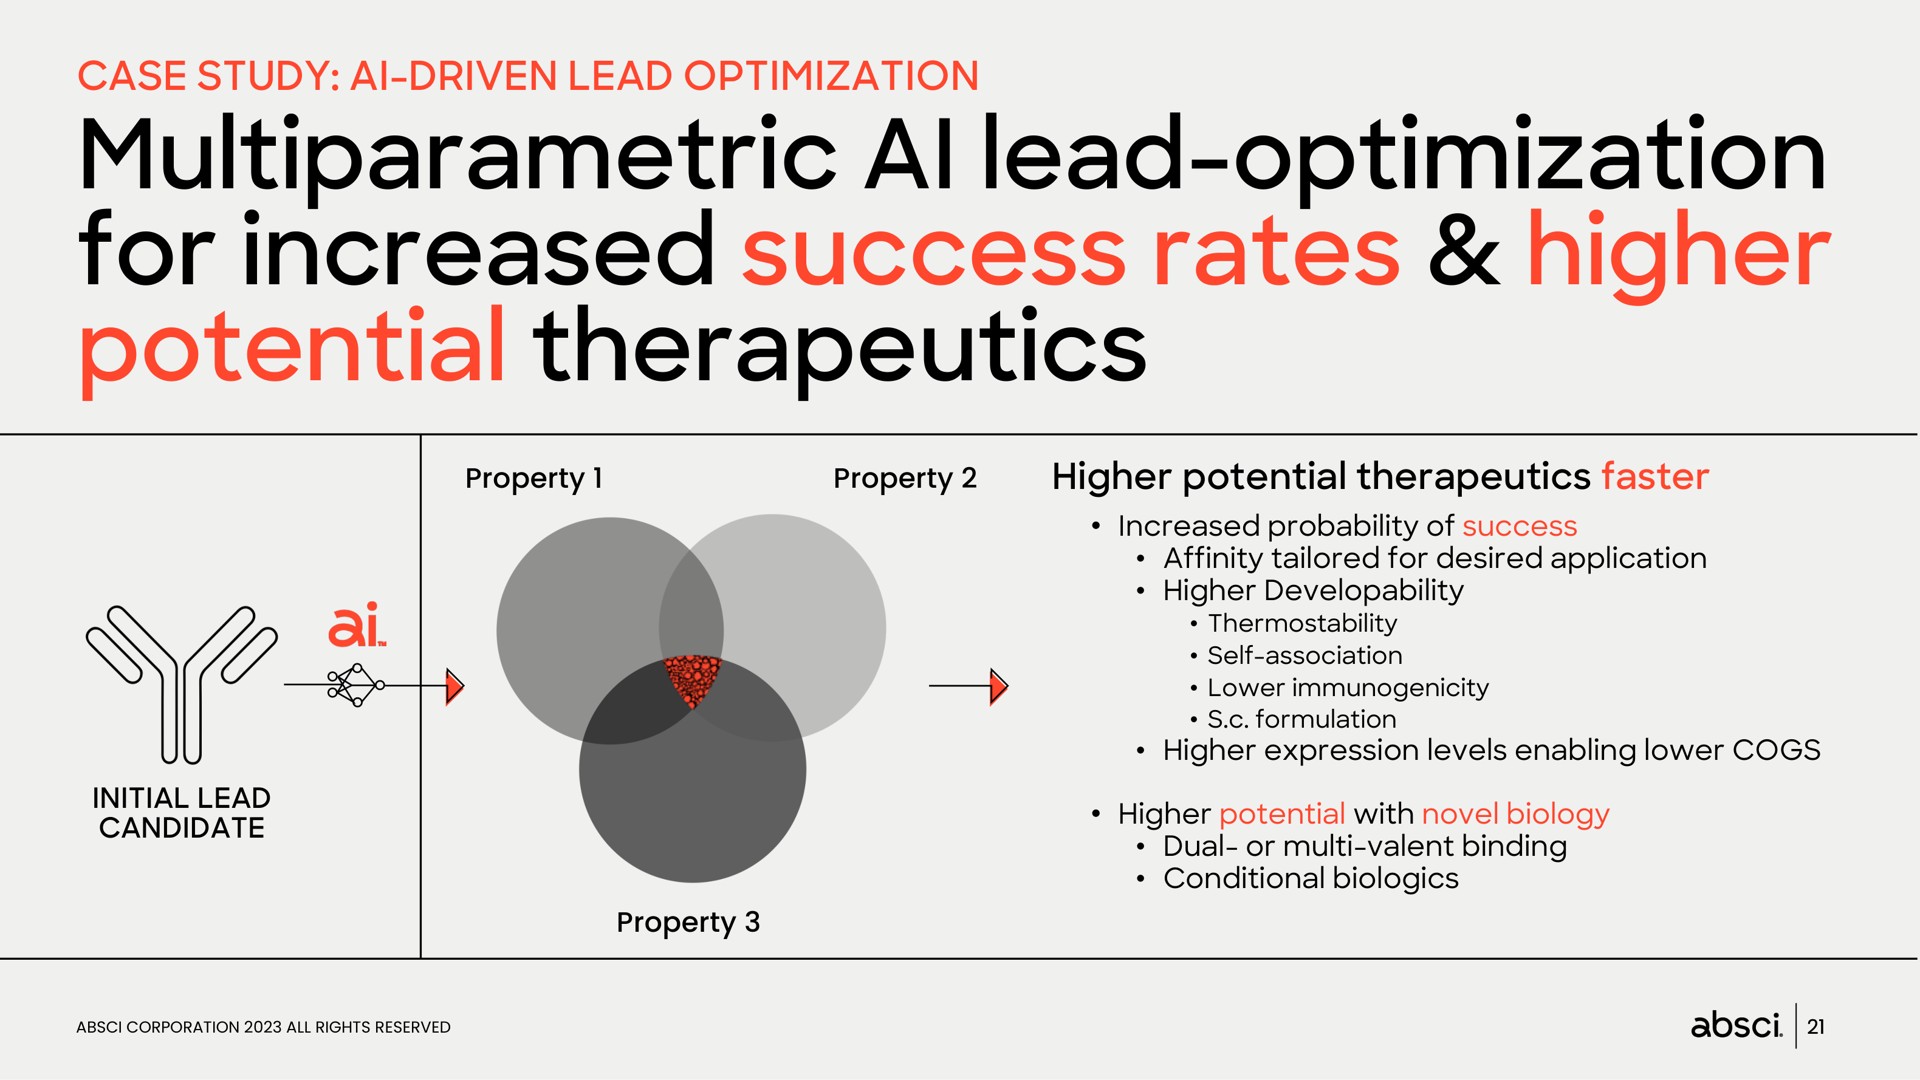 lead optimization for increased success rates higher potential therapeutics | Absci